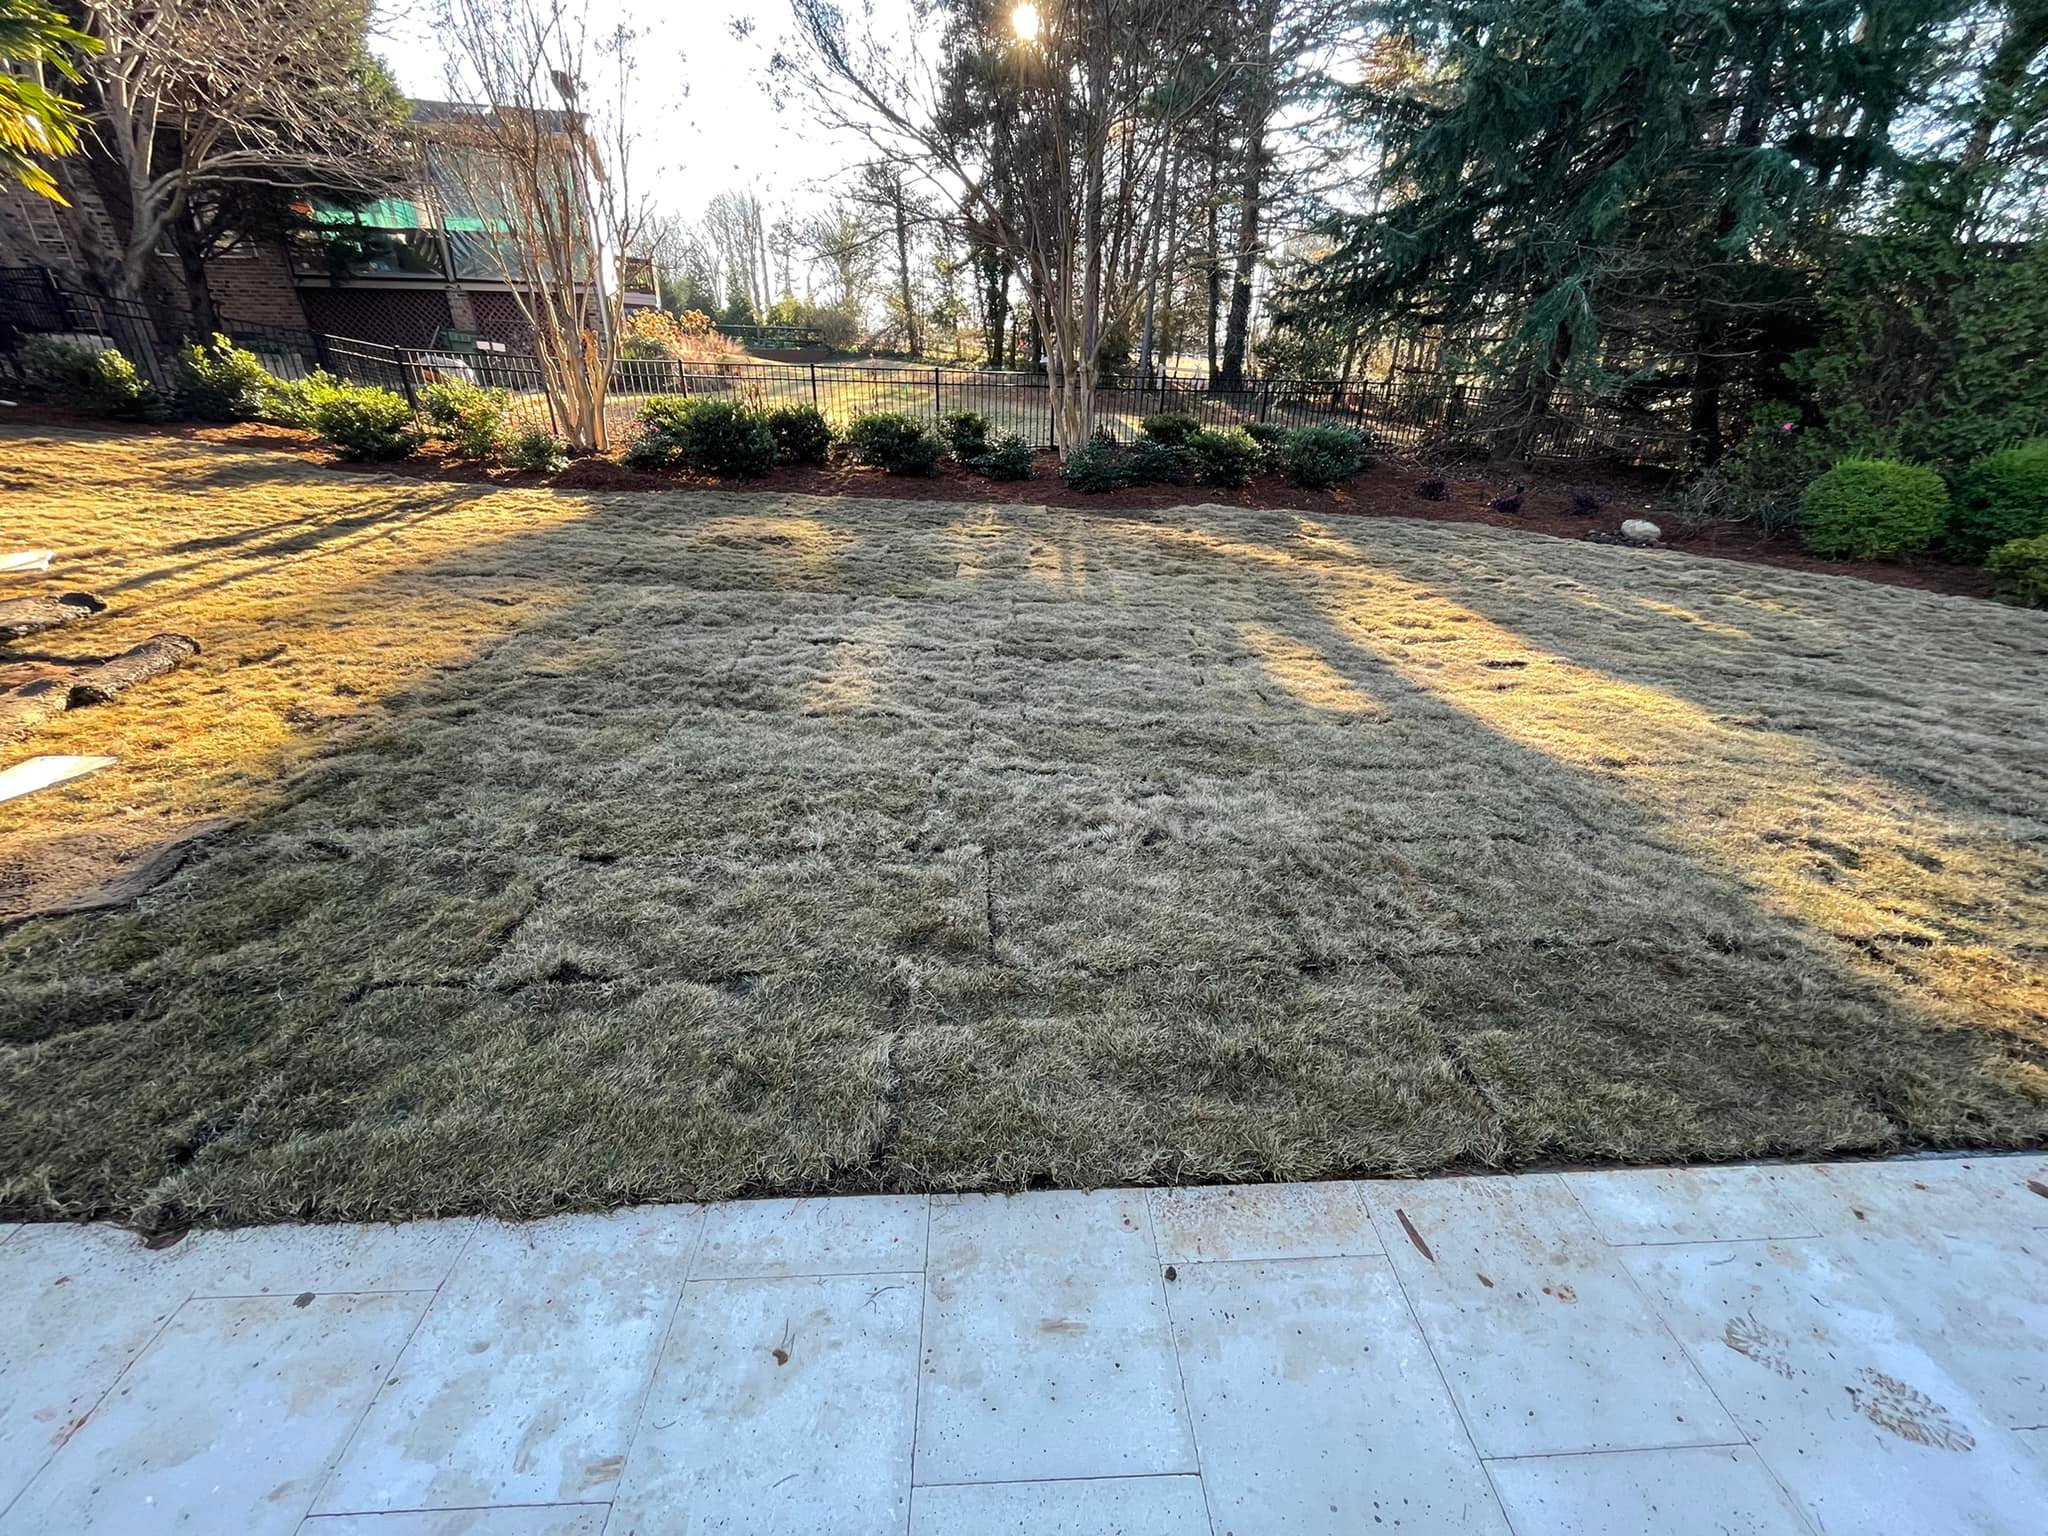 Zeon Zoysia Grass Sod – Outdoor Living Tip of the Day